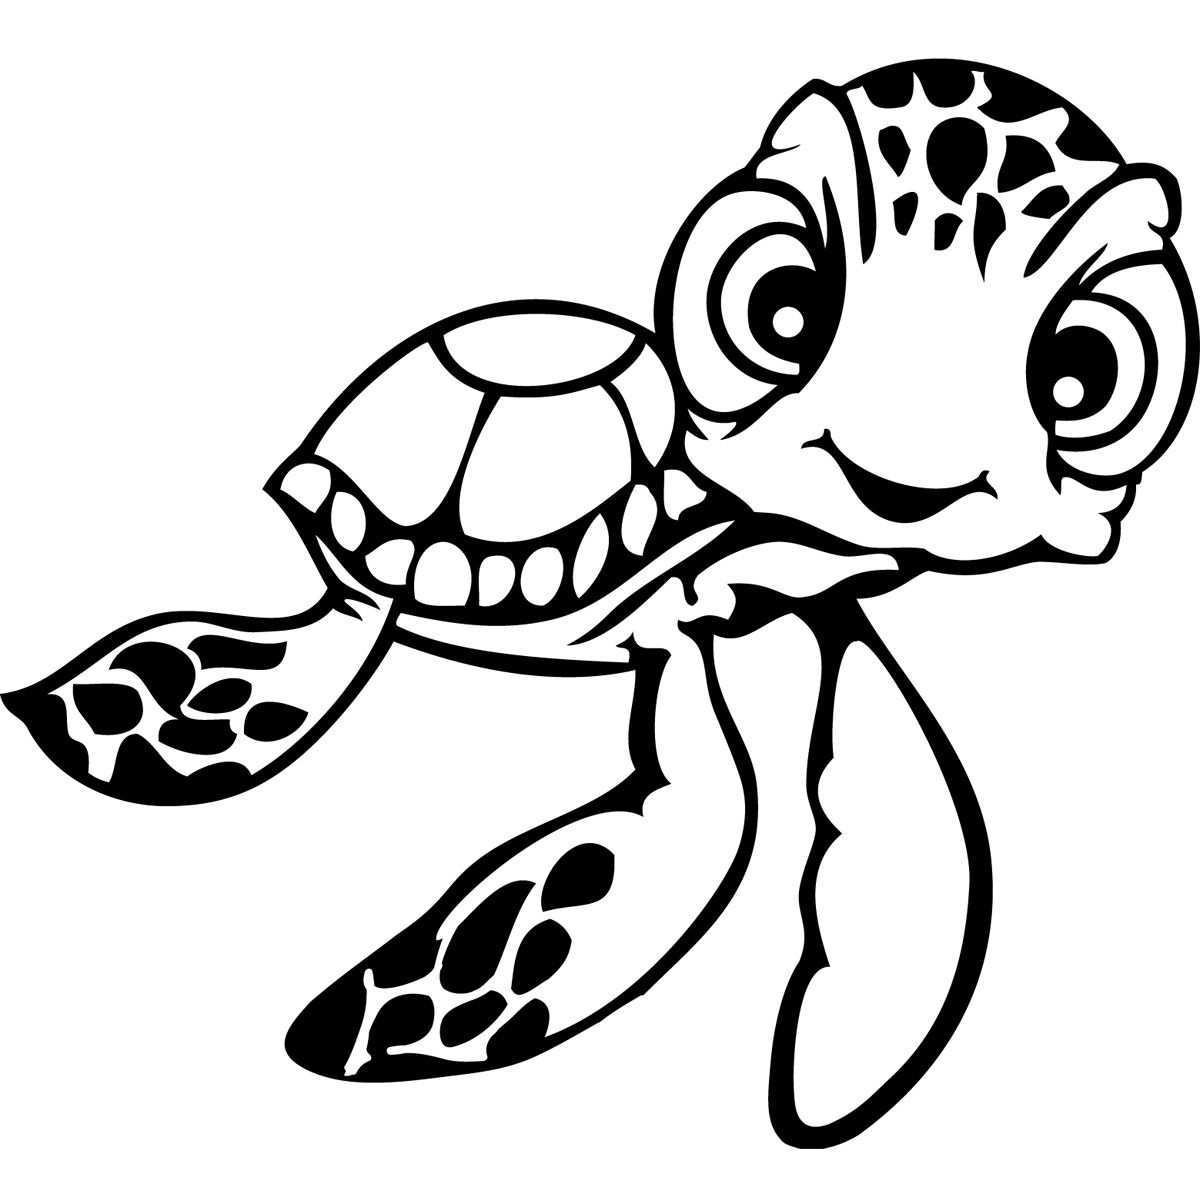 Nemo Coloring Pages Crush Turtle Coloring Pages Turtle Drawing Nemo Coloring Pages